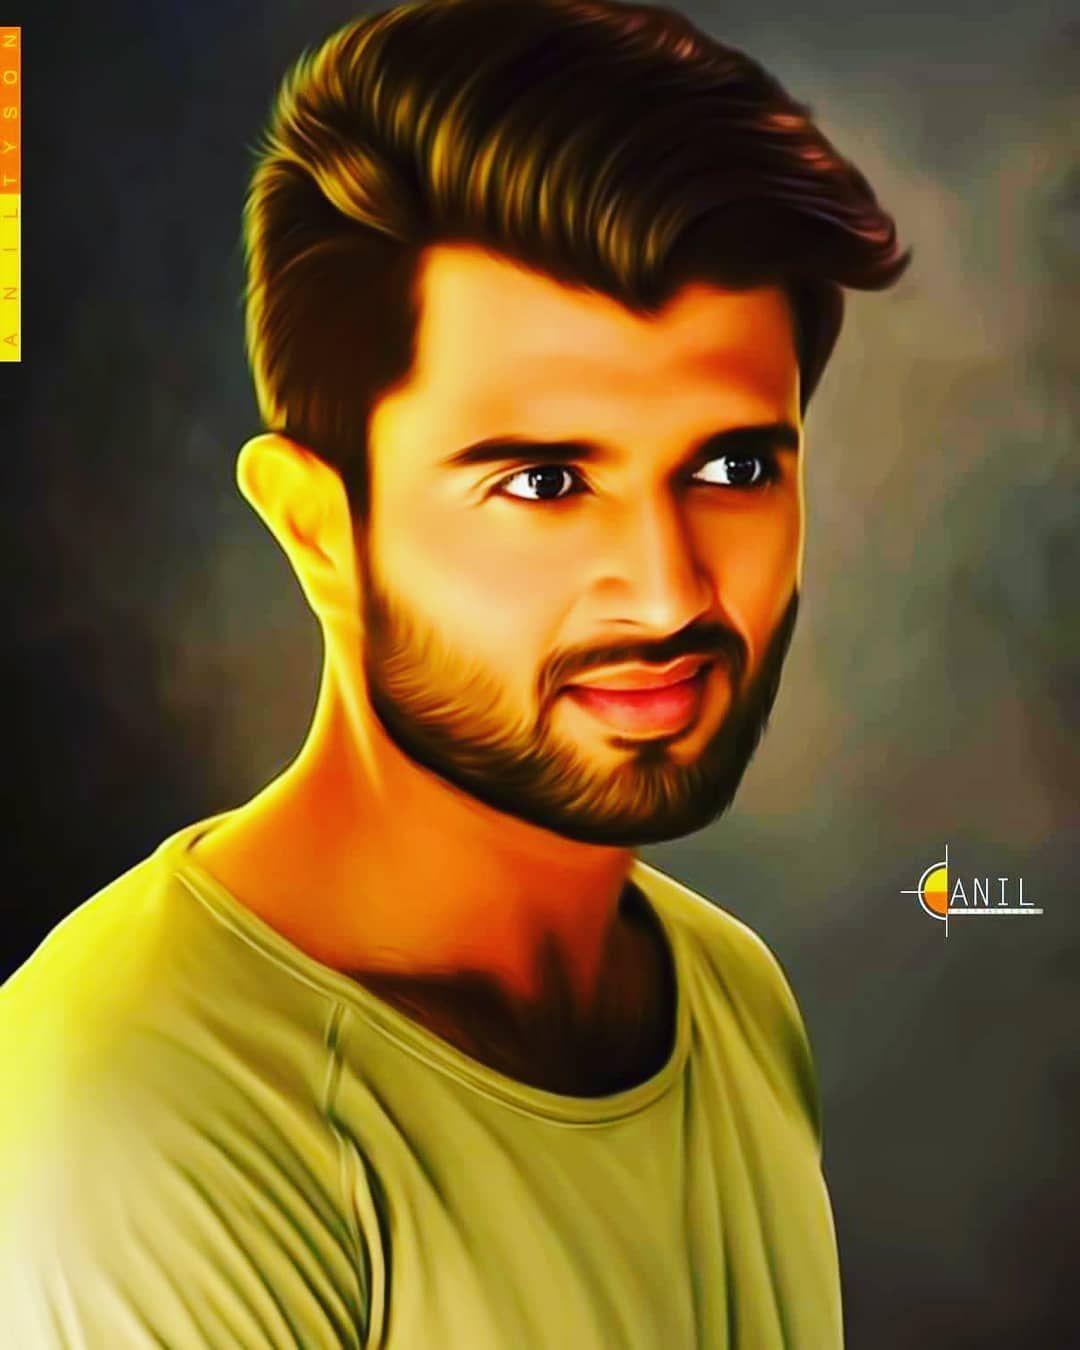 Vijay Devarakonda Hd Wallpapers Wallpaper Cave This is the article which provides full details in vijay devarakonda biography such as his age, dob, wiki, movies, wife, family, career, awards. vijay devarakonda hd wallpapers